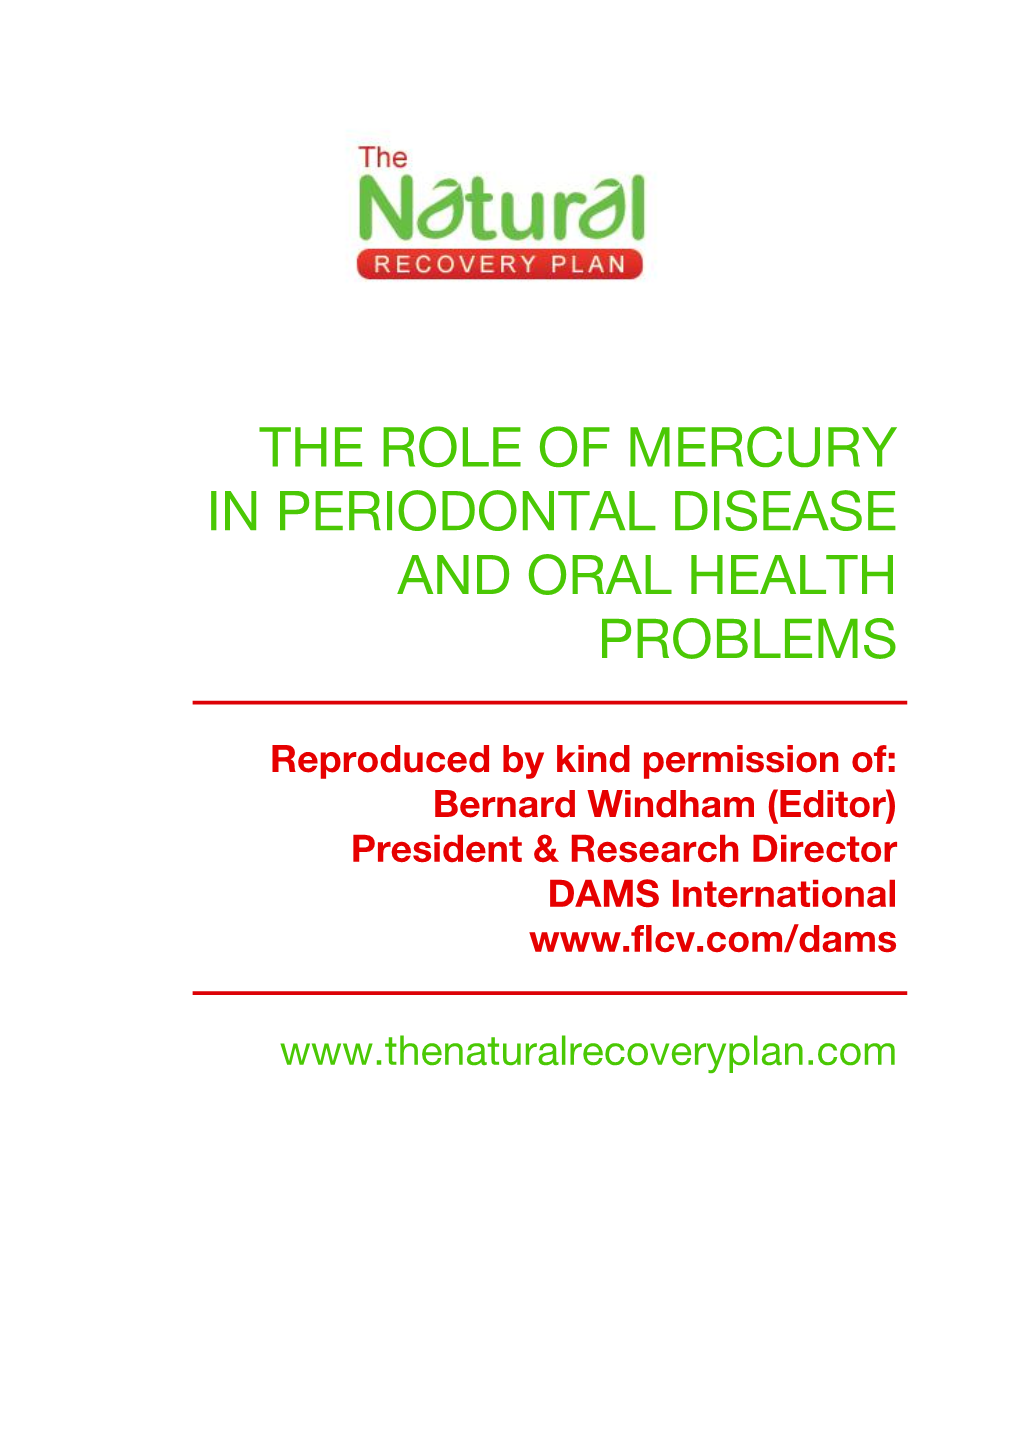 The Role of Mercury in Periodontal Disease and Oral Health Problems